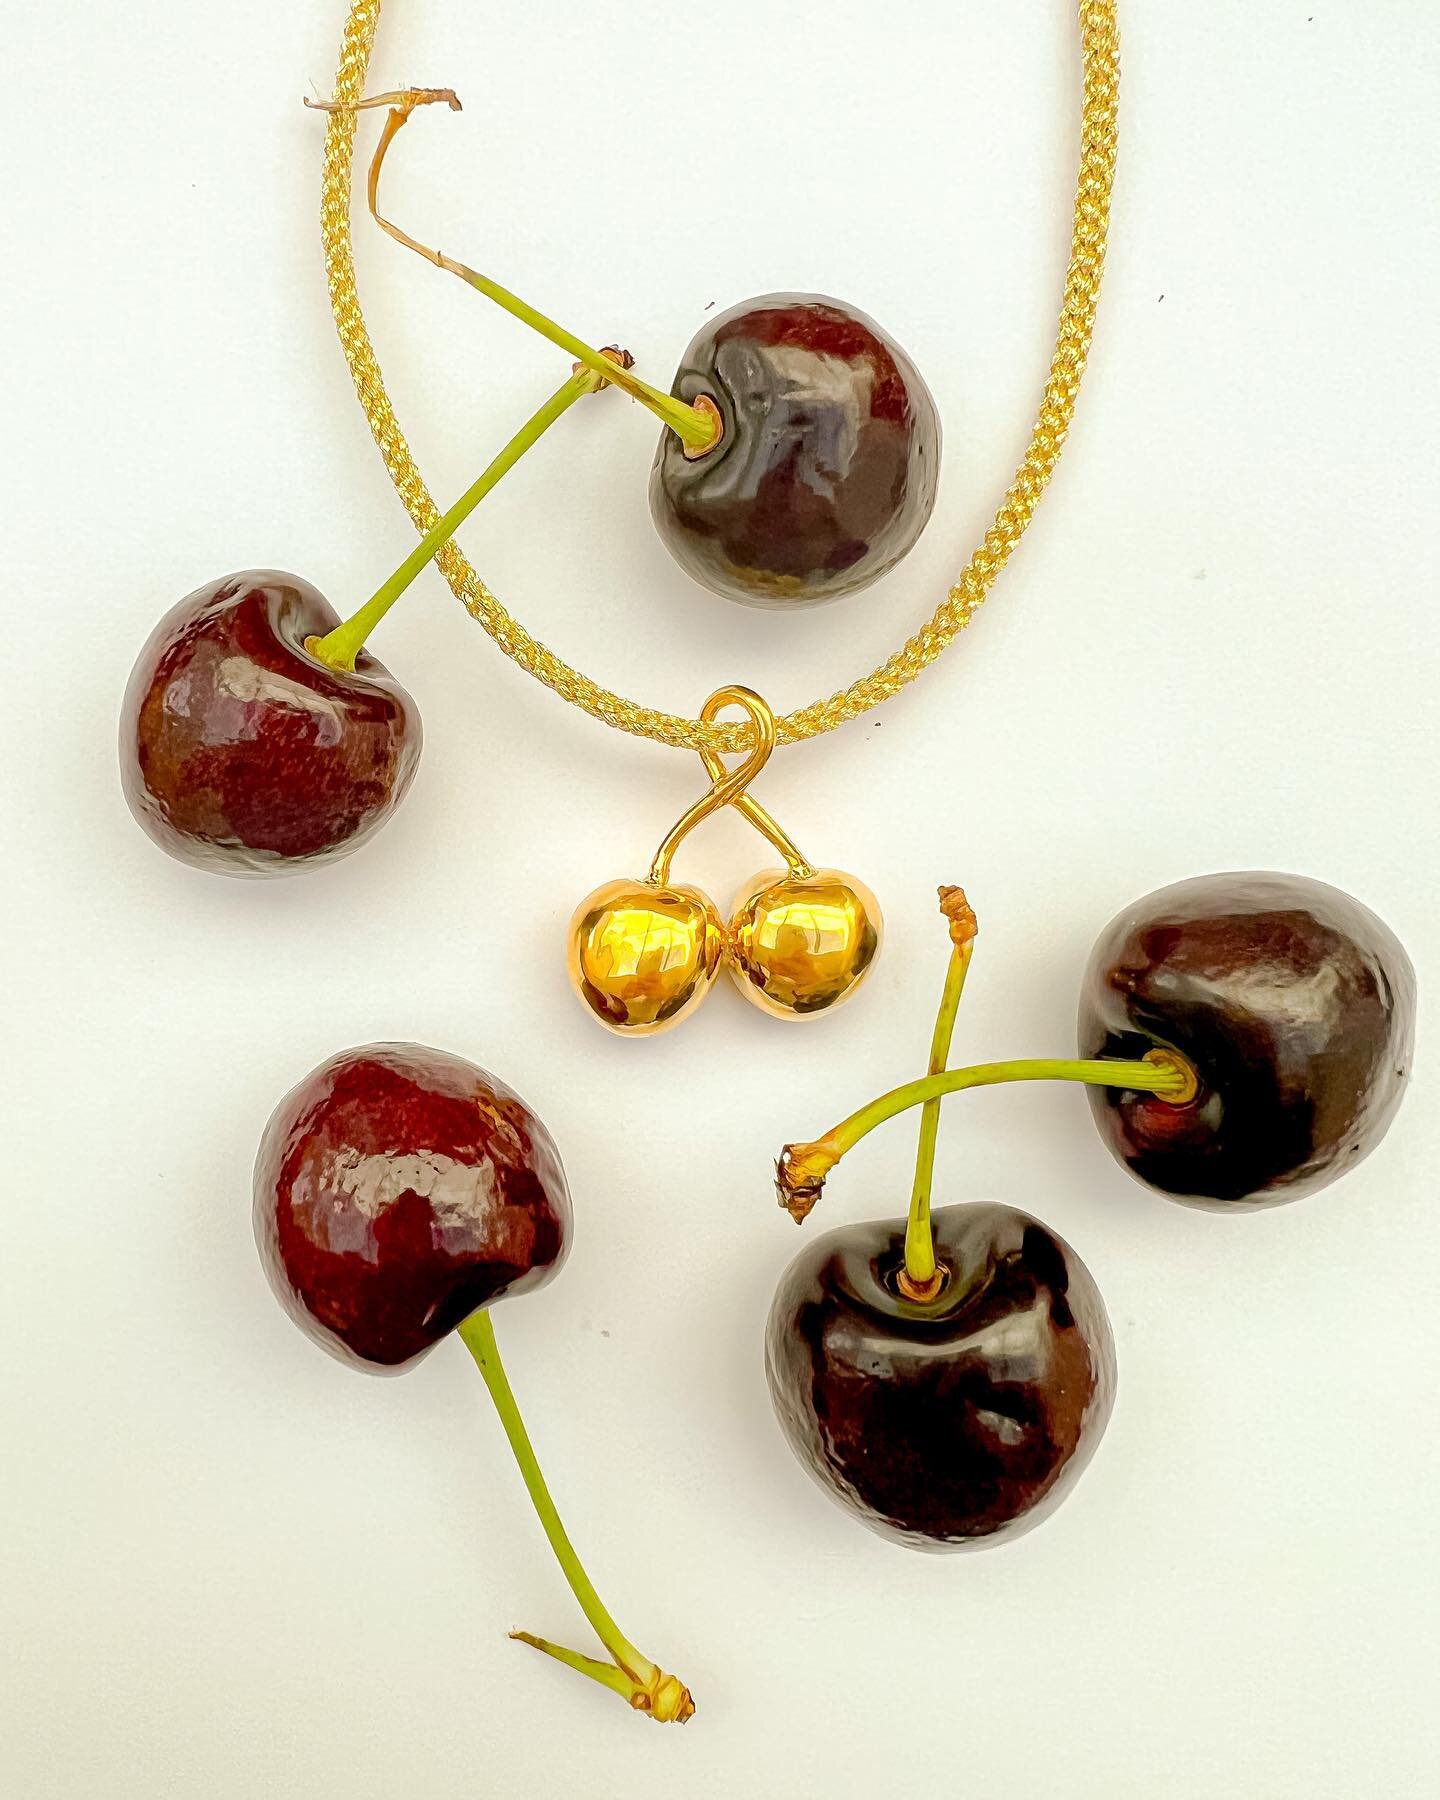 Cherry necklace in gold plated or 9 carat gold with handwoven gold thread. Originally hand-carved in wax (swipe to see wax work), you can see the trace of my hand in every jewel. Order yours now at www.josephinedestael.com #jewellery #lostwaxcasting 